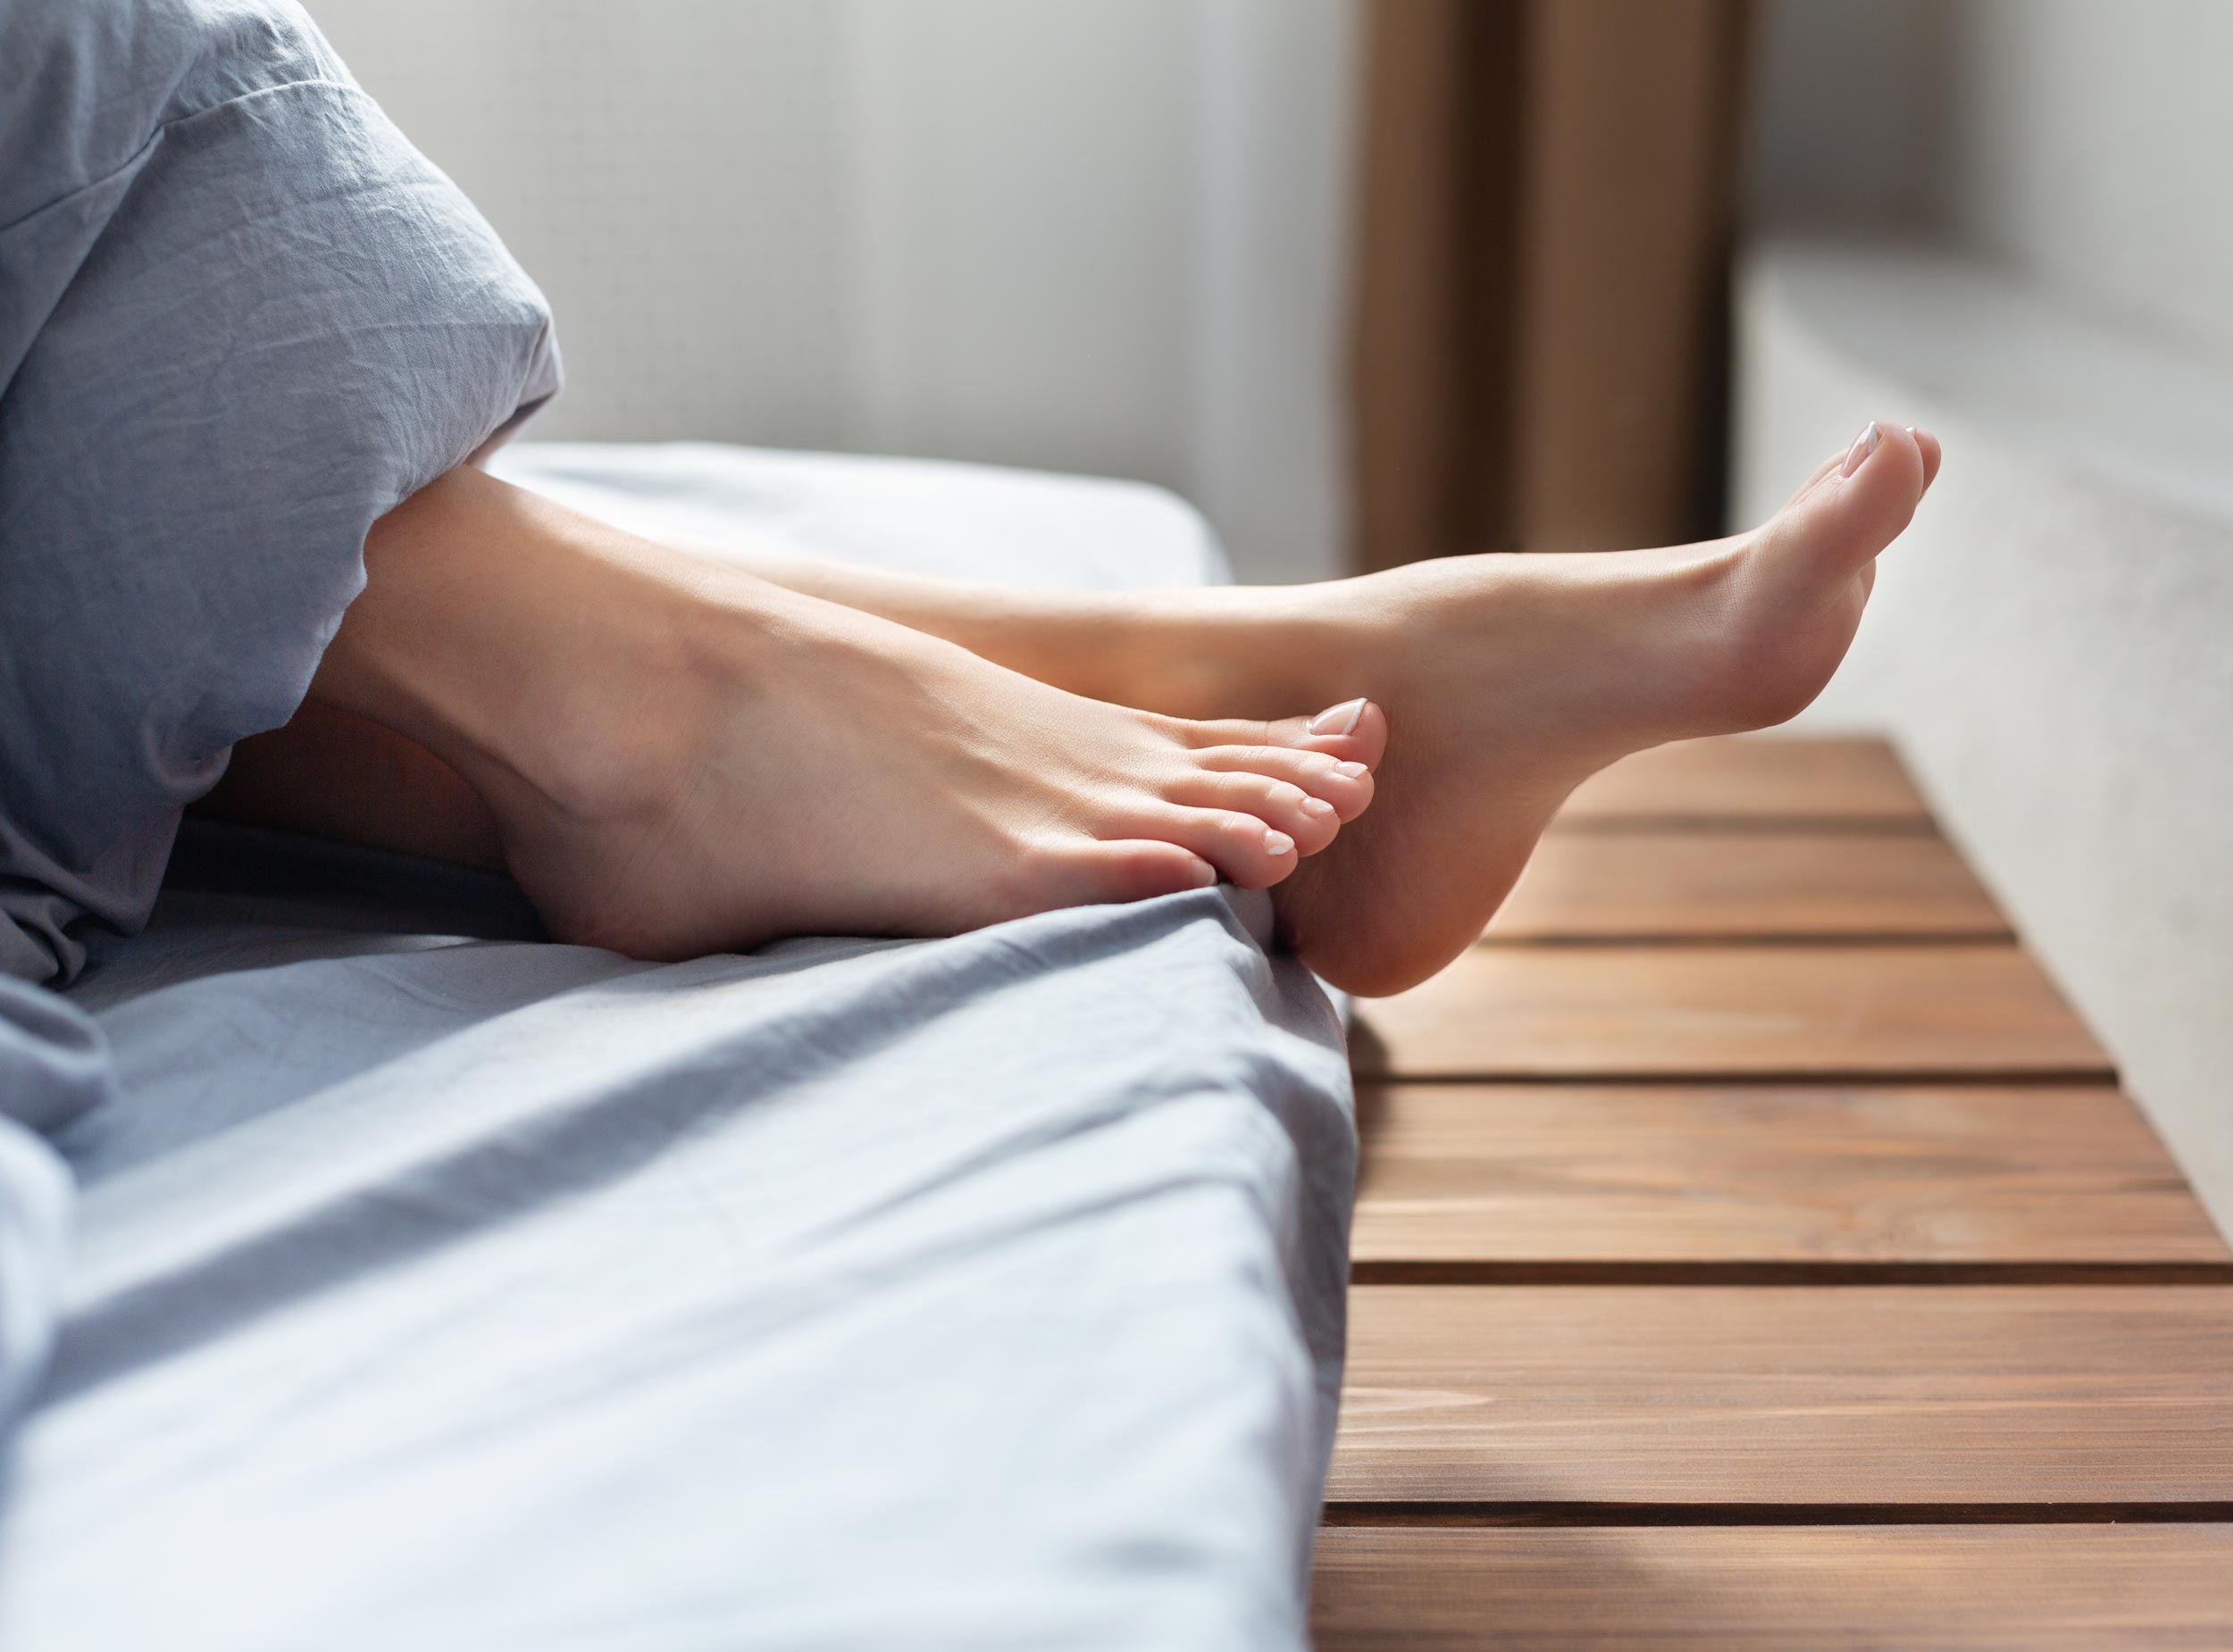 Foot Hygiene: How to Keep Your Feet Clean